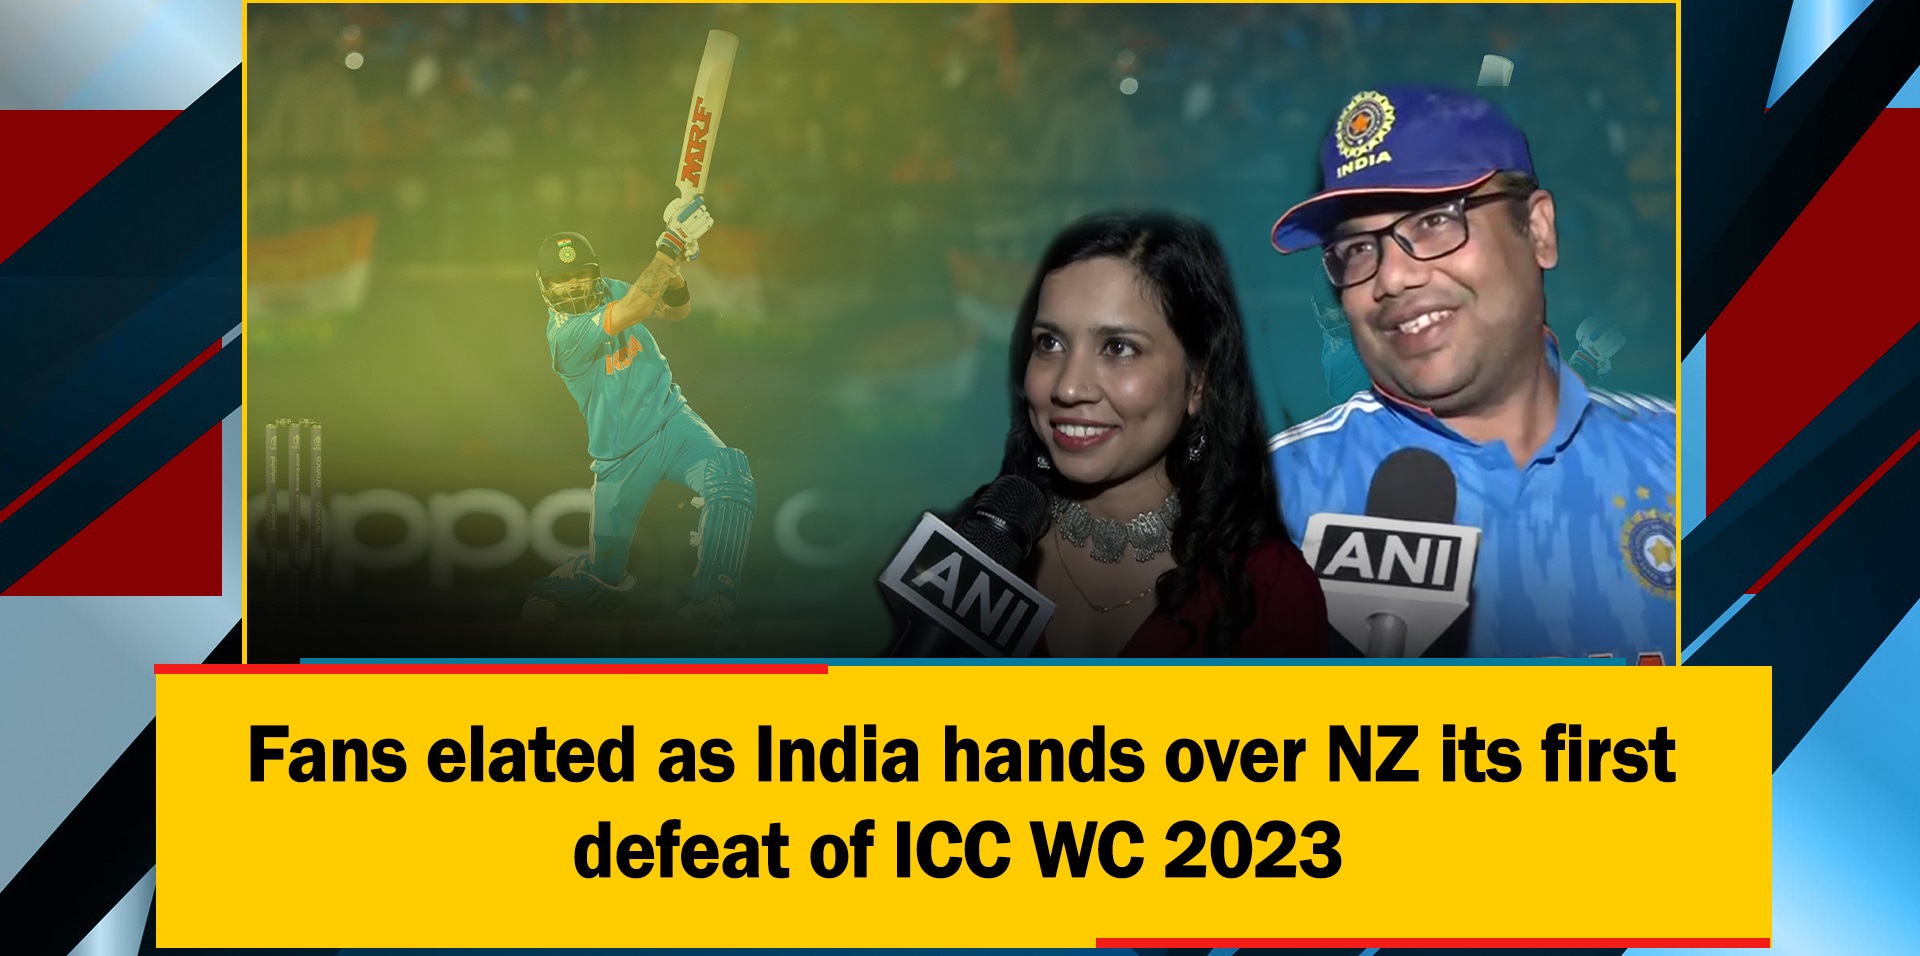 Fans elated as India hands over NZ its first defeat of ICC WC 2023